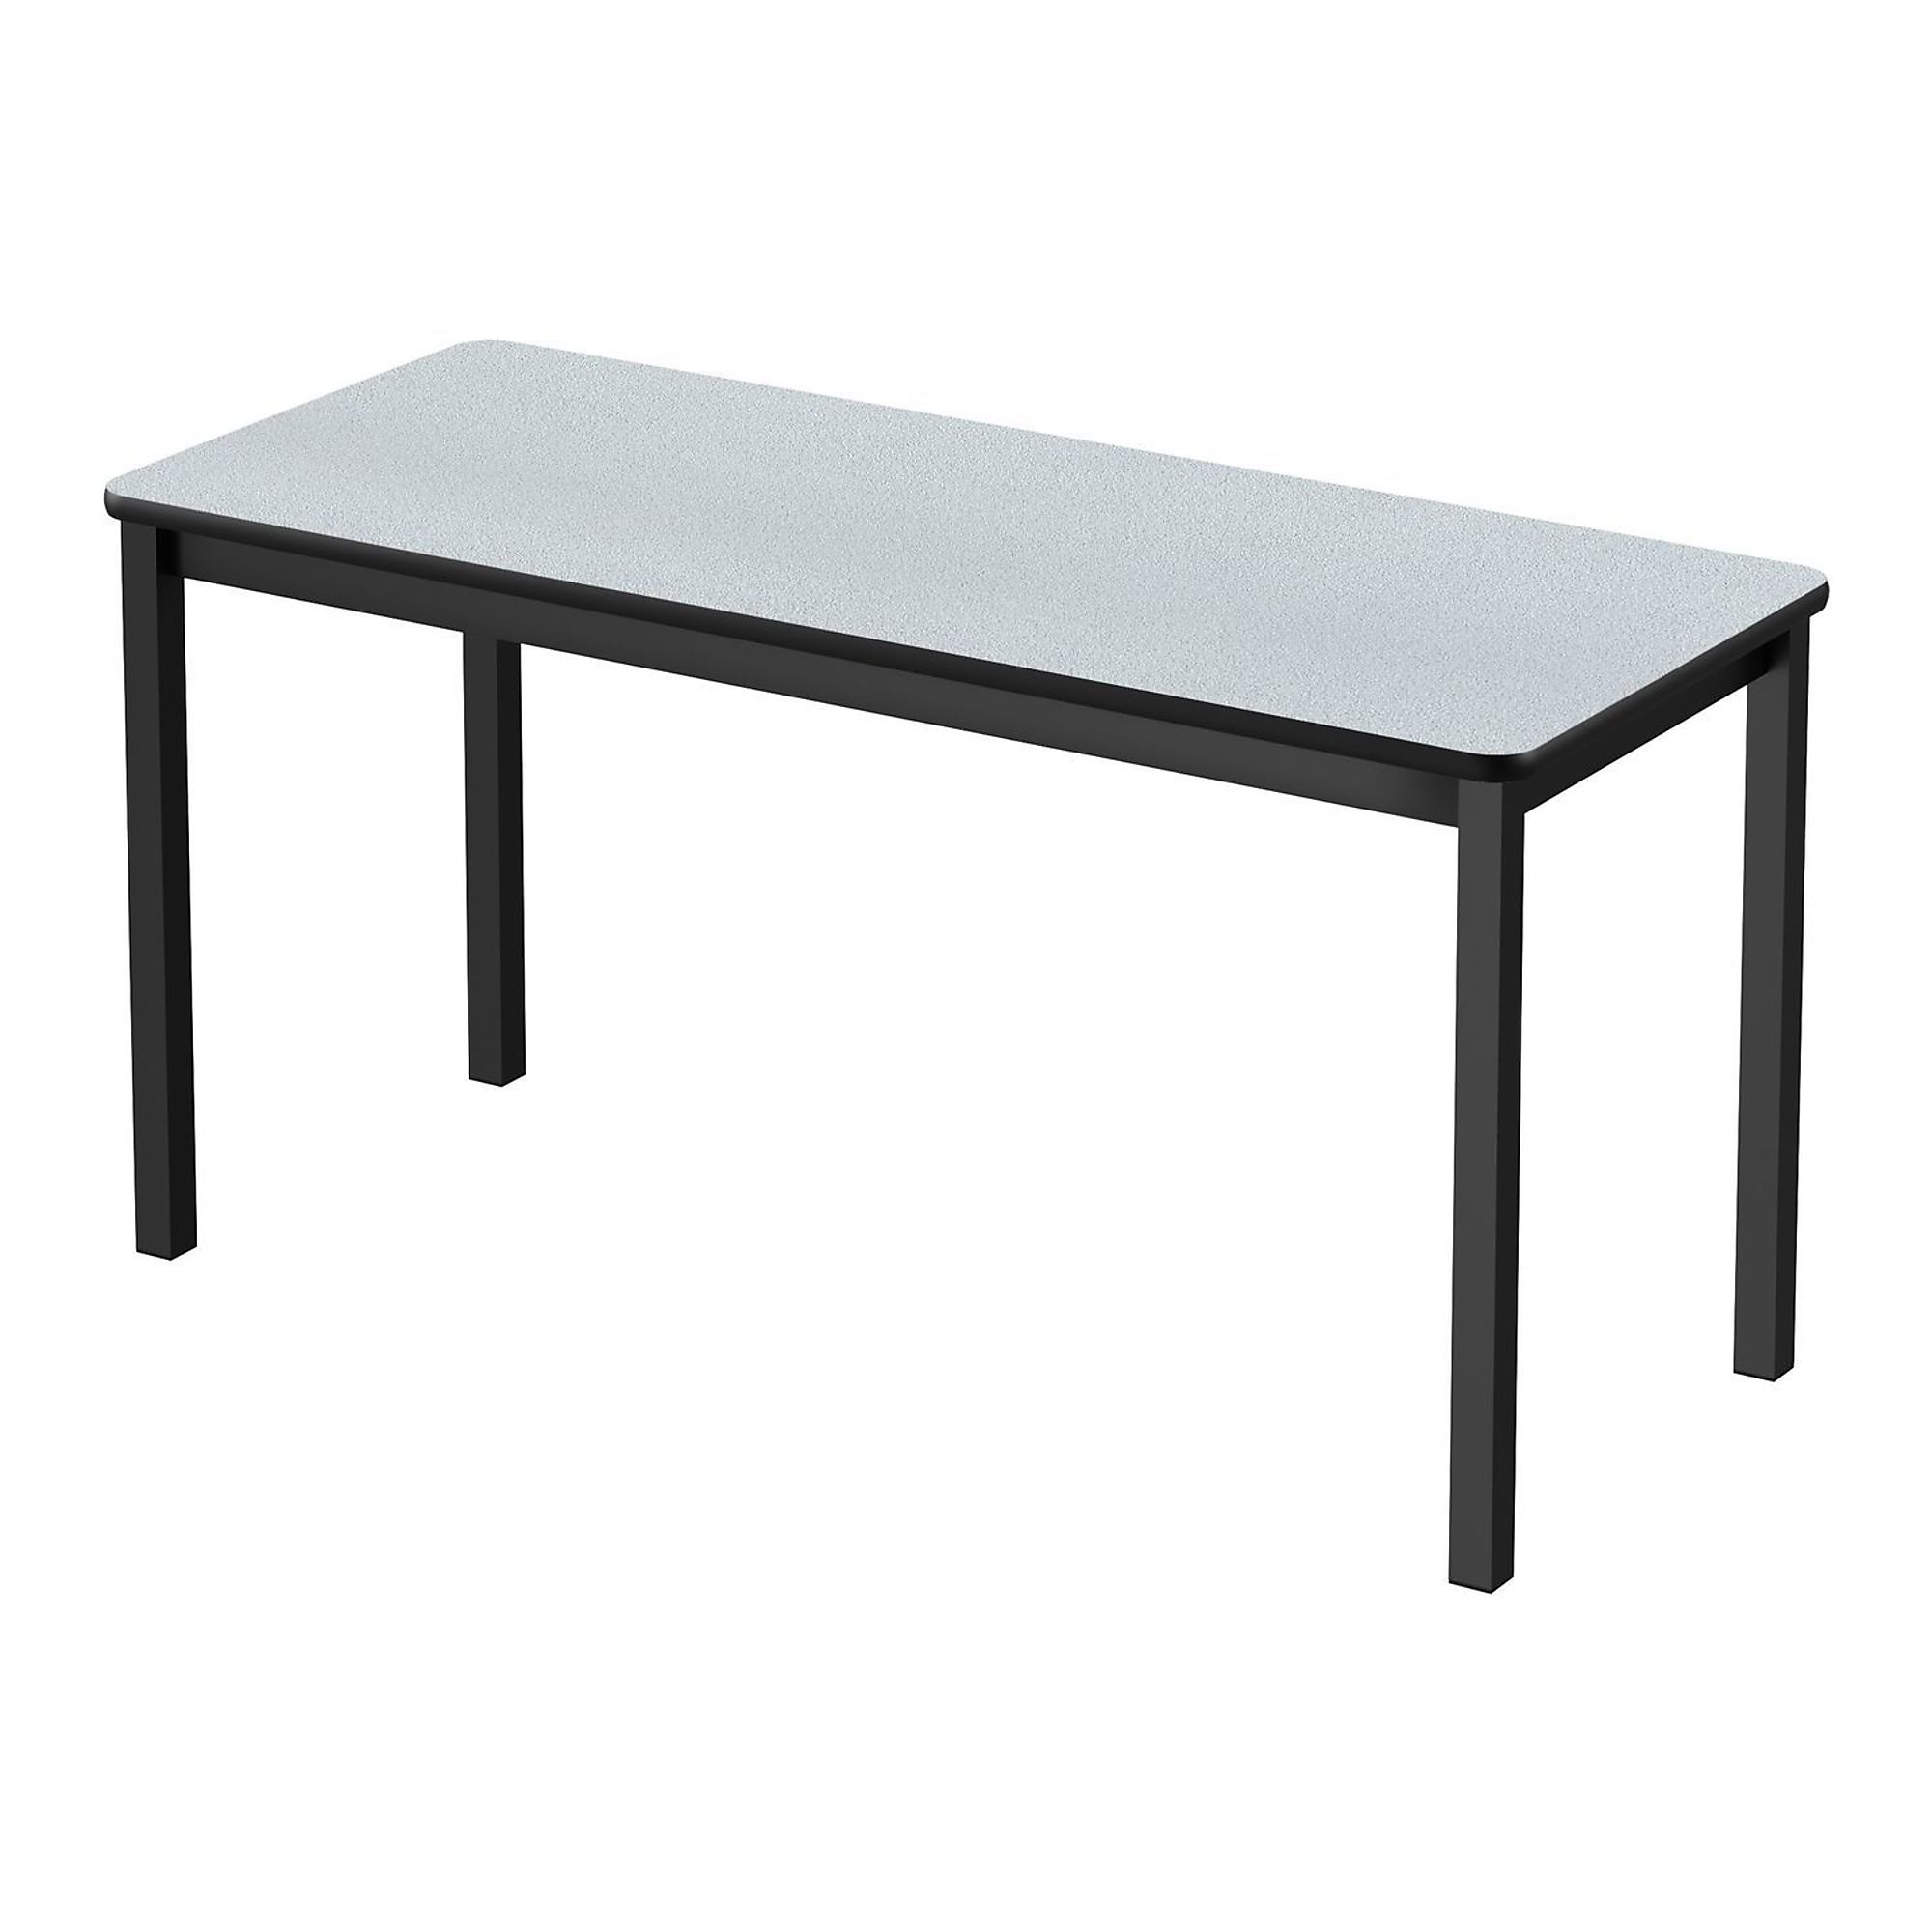 Correll, TFL Lab Table, Gray Granite, 36x60, Height 36 in, Width 30 in, Length 60 in, Model LT3060TF-15